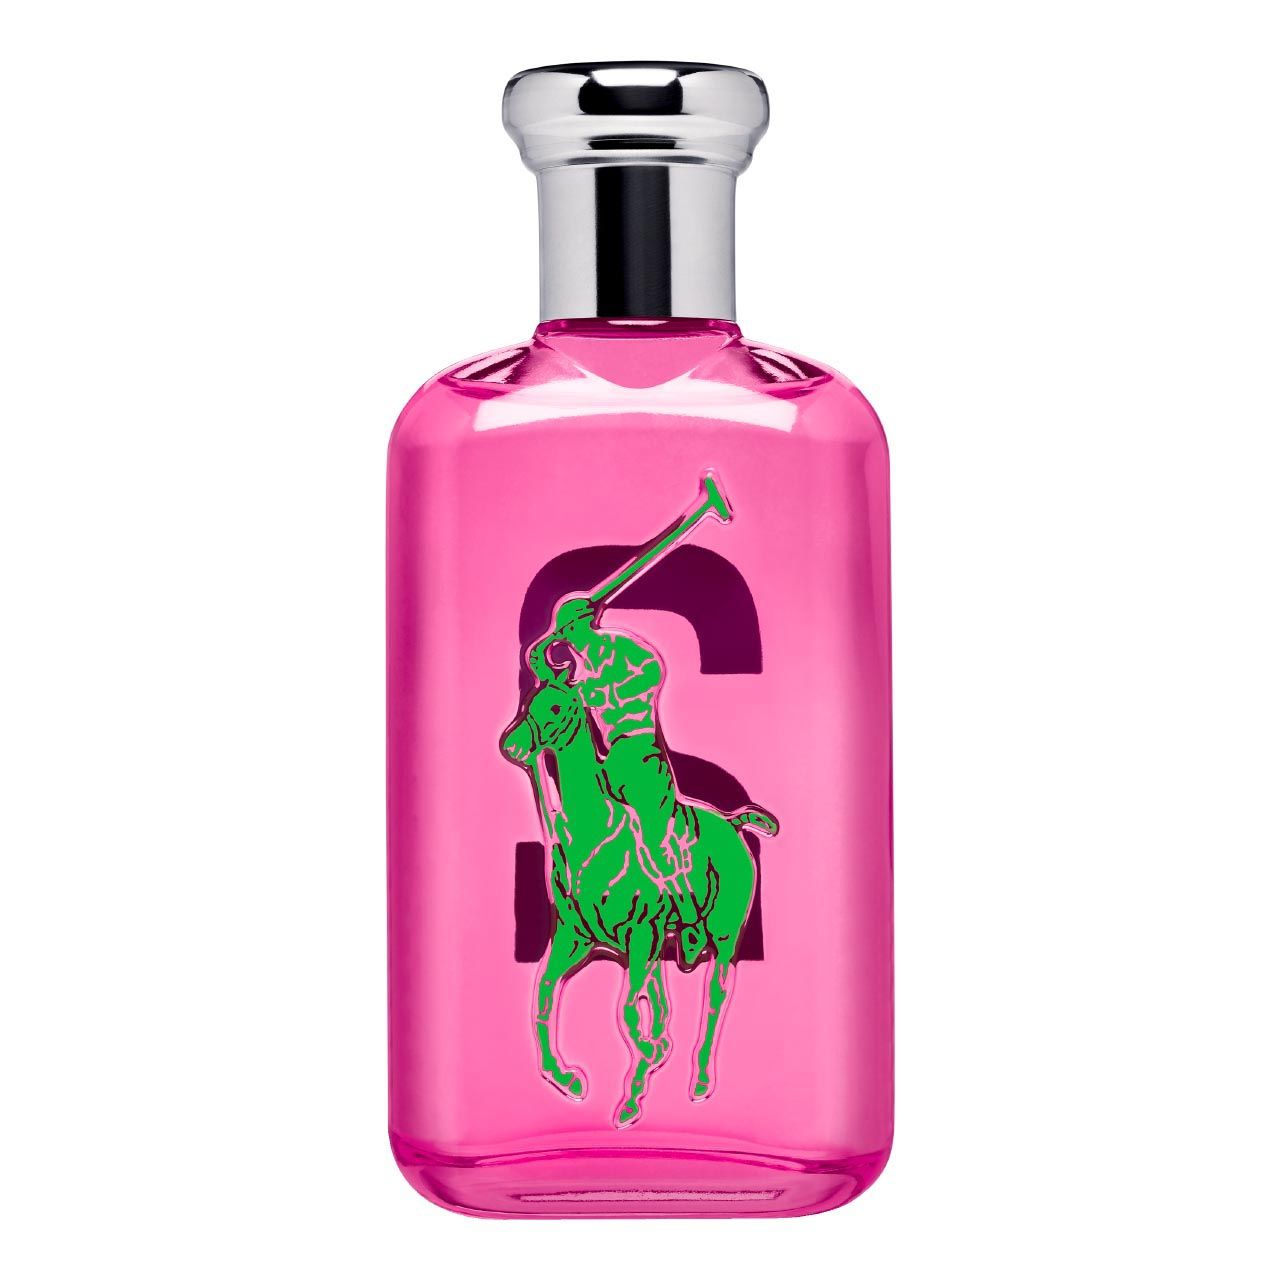 RALPH LAUREN THE Big Pony EDT - 100ml - For Her, For Him £32.99 - PicClick  UK